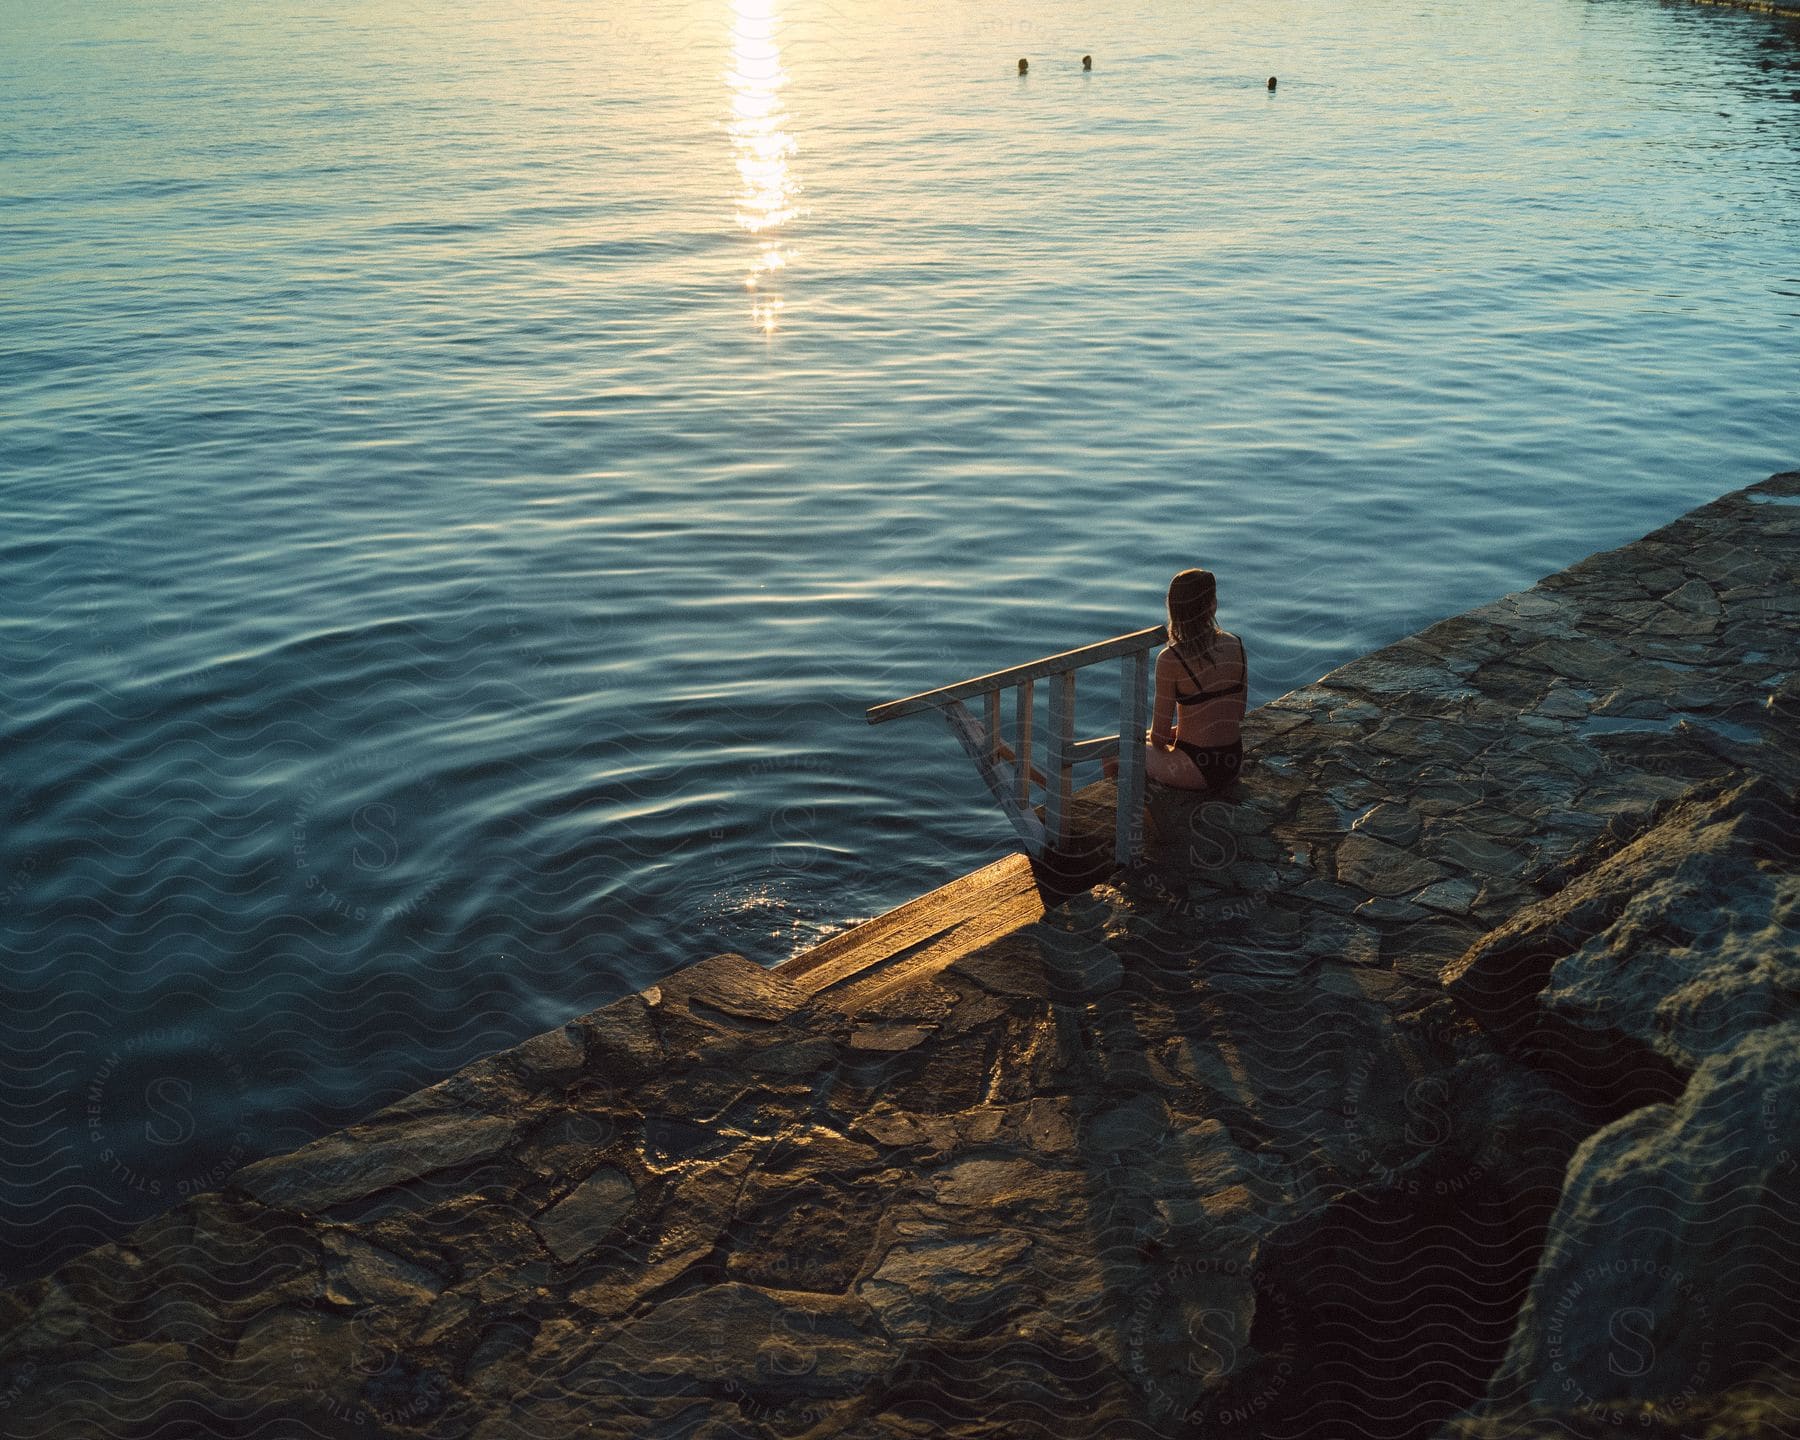 A woman sits by the water as others swim